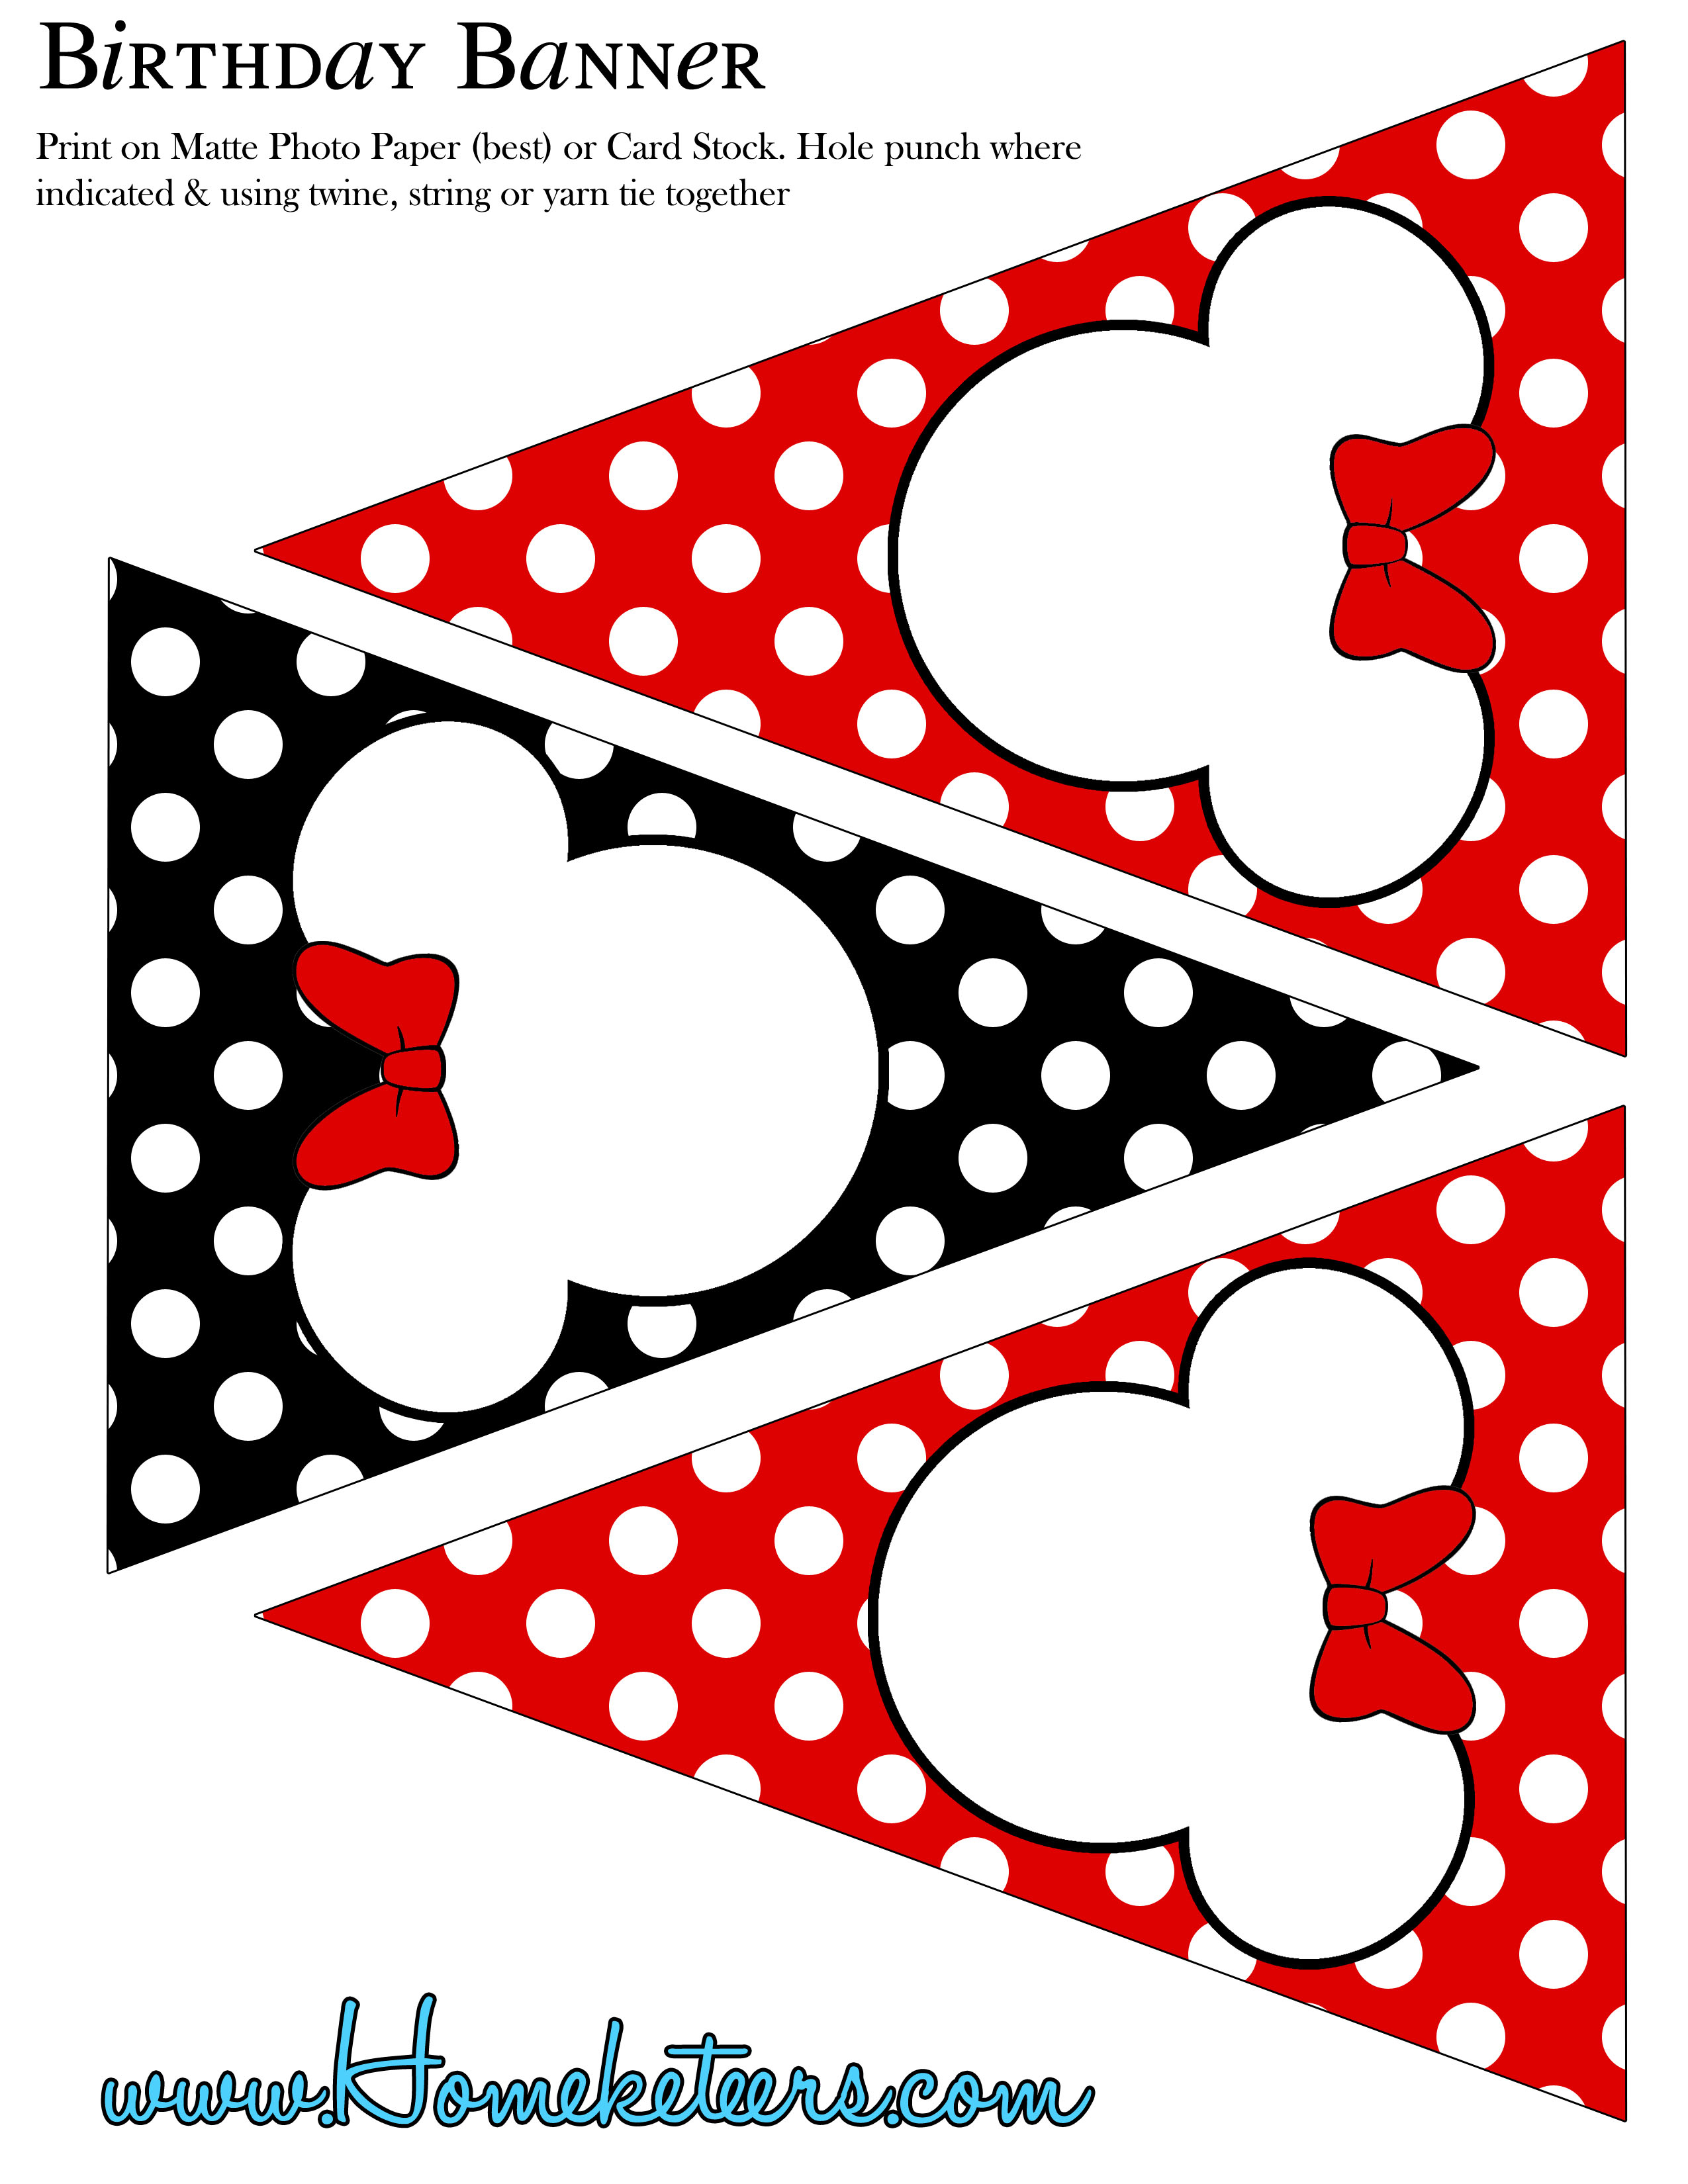 Minnie Mouse Party Printable Kit – Red {Free} - Free Printable Minnie Mouse Birthday Banner